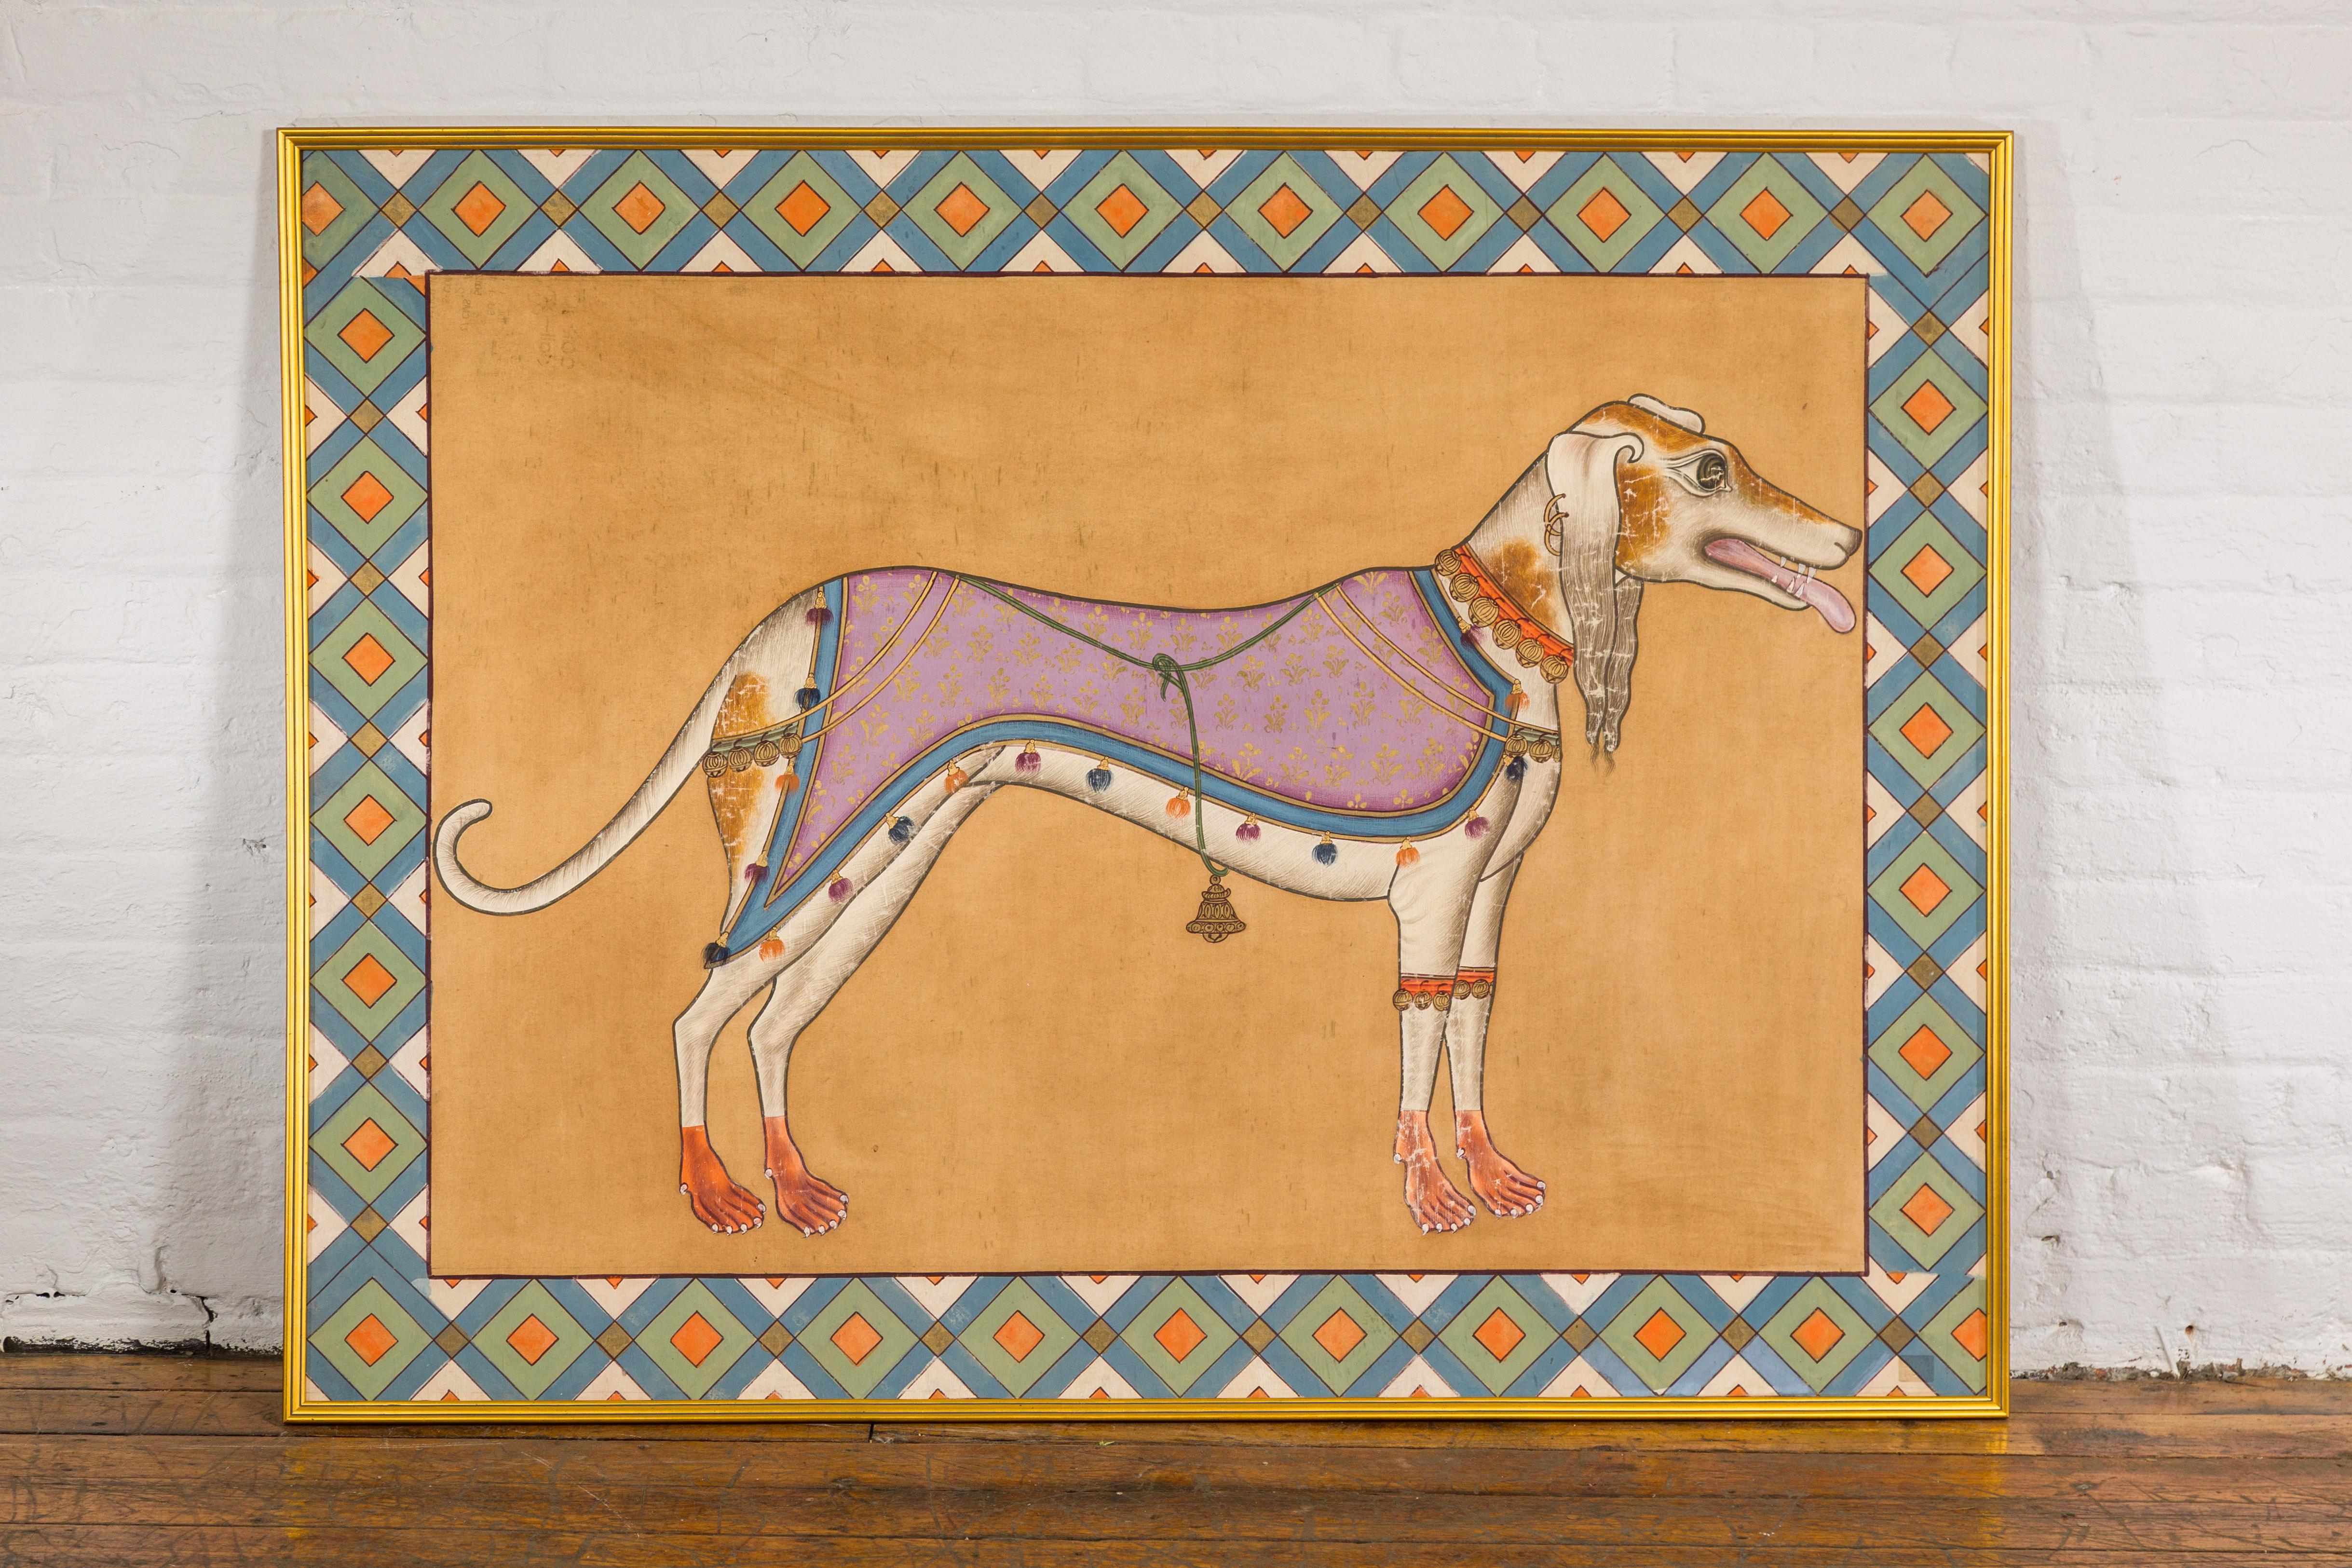 A vintage hand-painted Indian Royal Greyhound Dog mounted on fabric and set inside a gilded frame. A captivating depiction of regality and elegance, this vintage hand-painted Indian Royal Greyhound Dog exudes an ethereal charm. The graceful canine